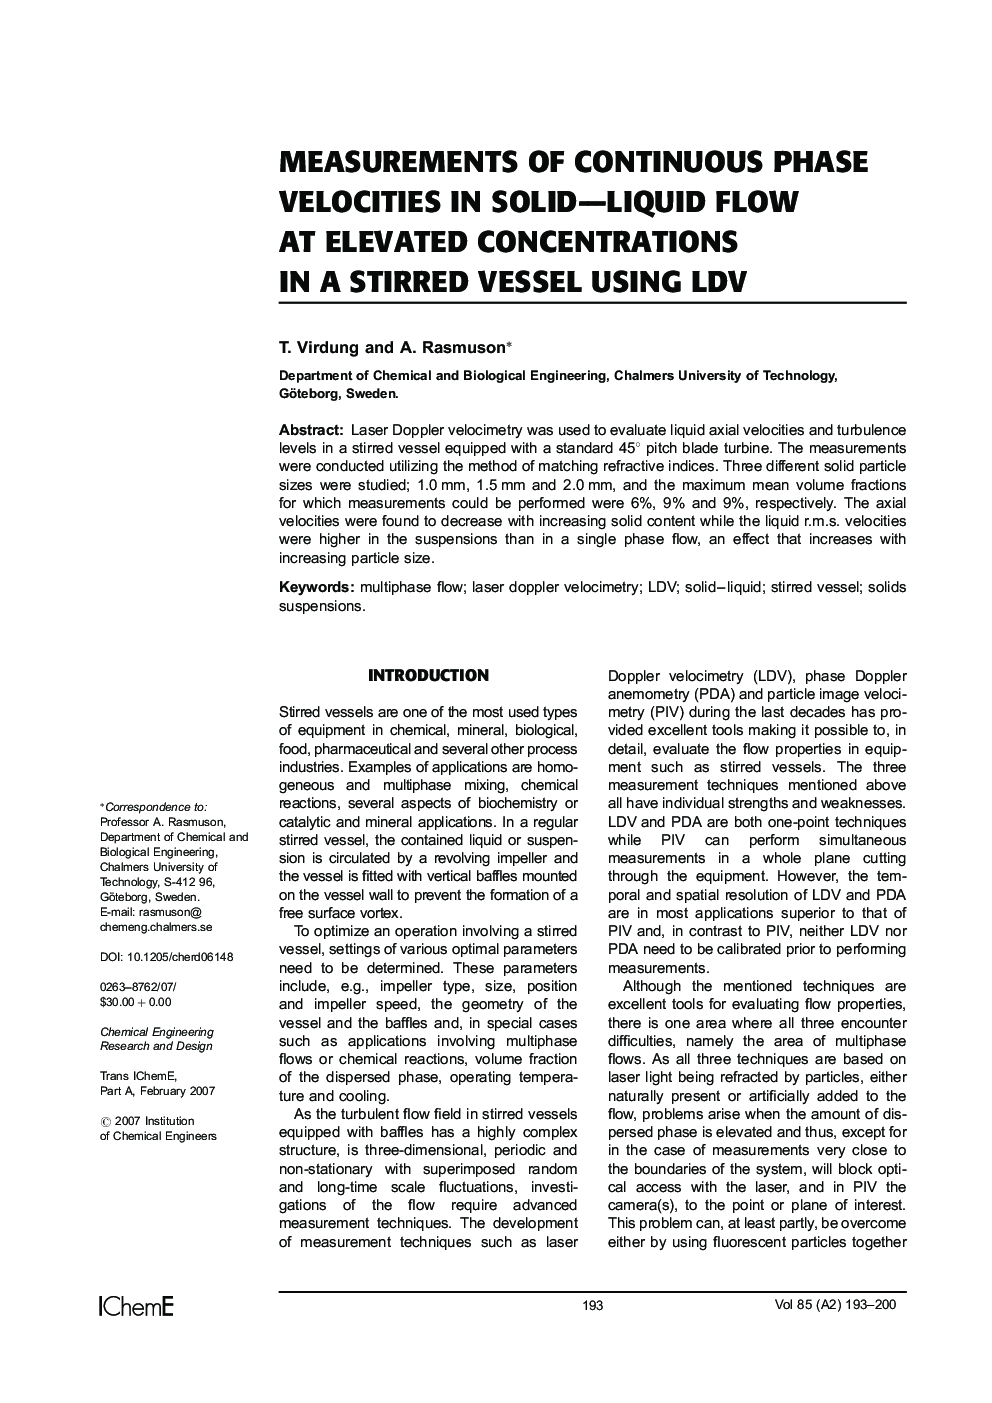 Measurements of Continuous Phase Velocities in Solid–Liquid Flow at Elevated Concentrations in a Stirred Vessel Using LDV